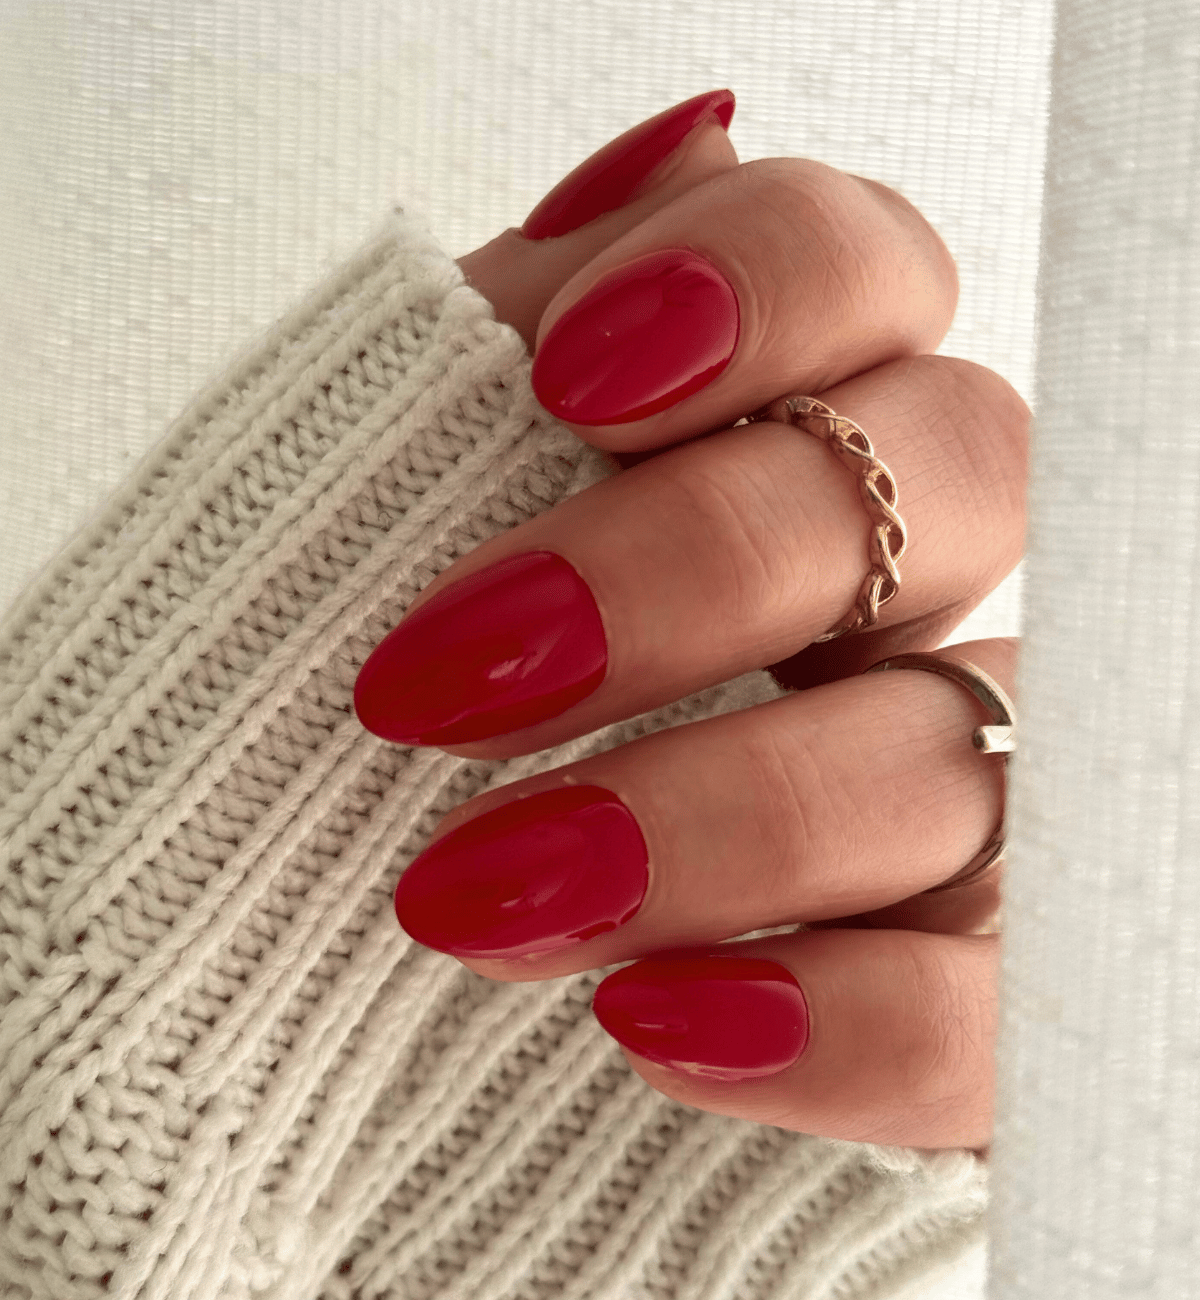 FAUX ONGLES ROUGE AMANDE COURT